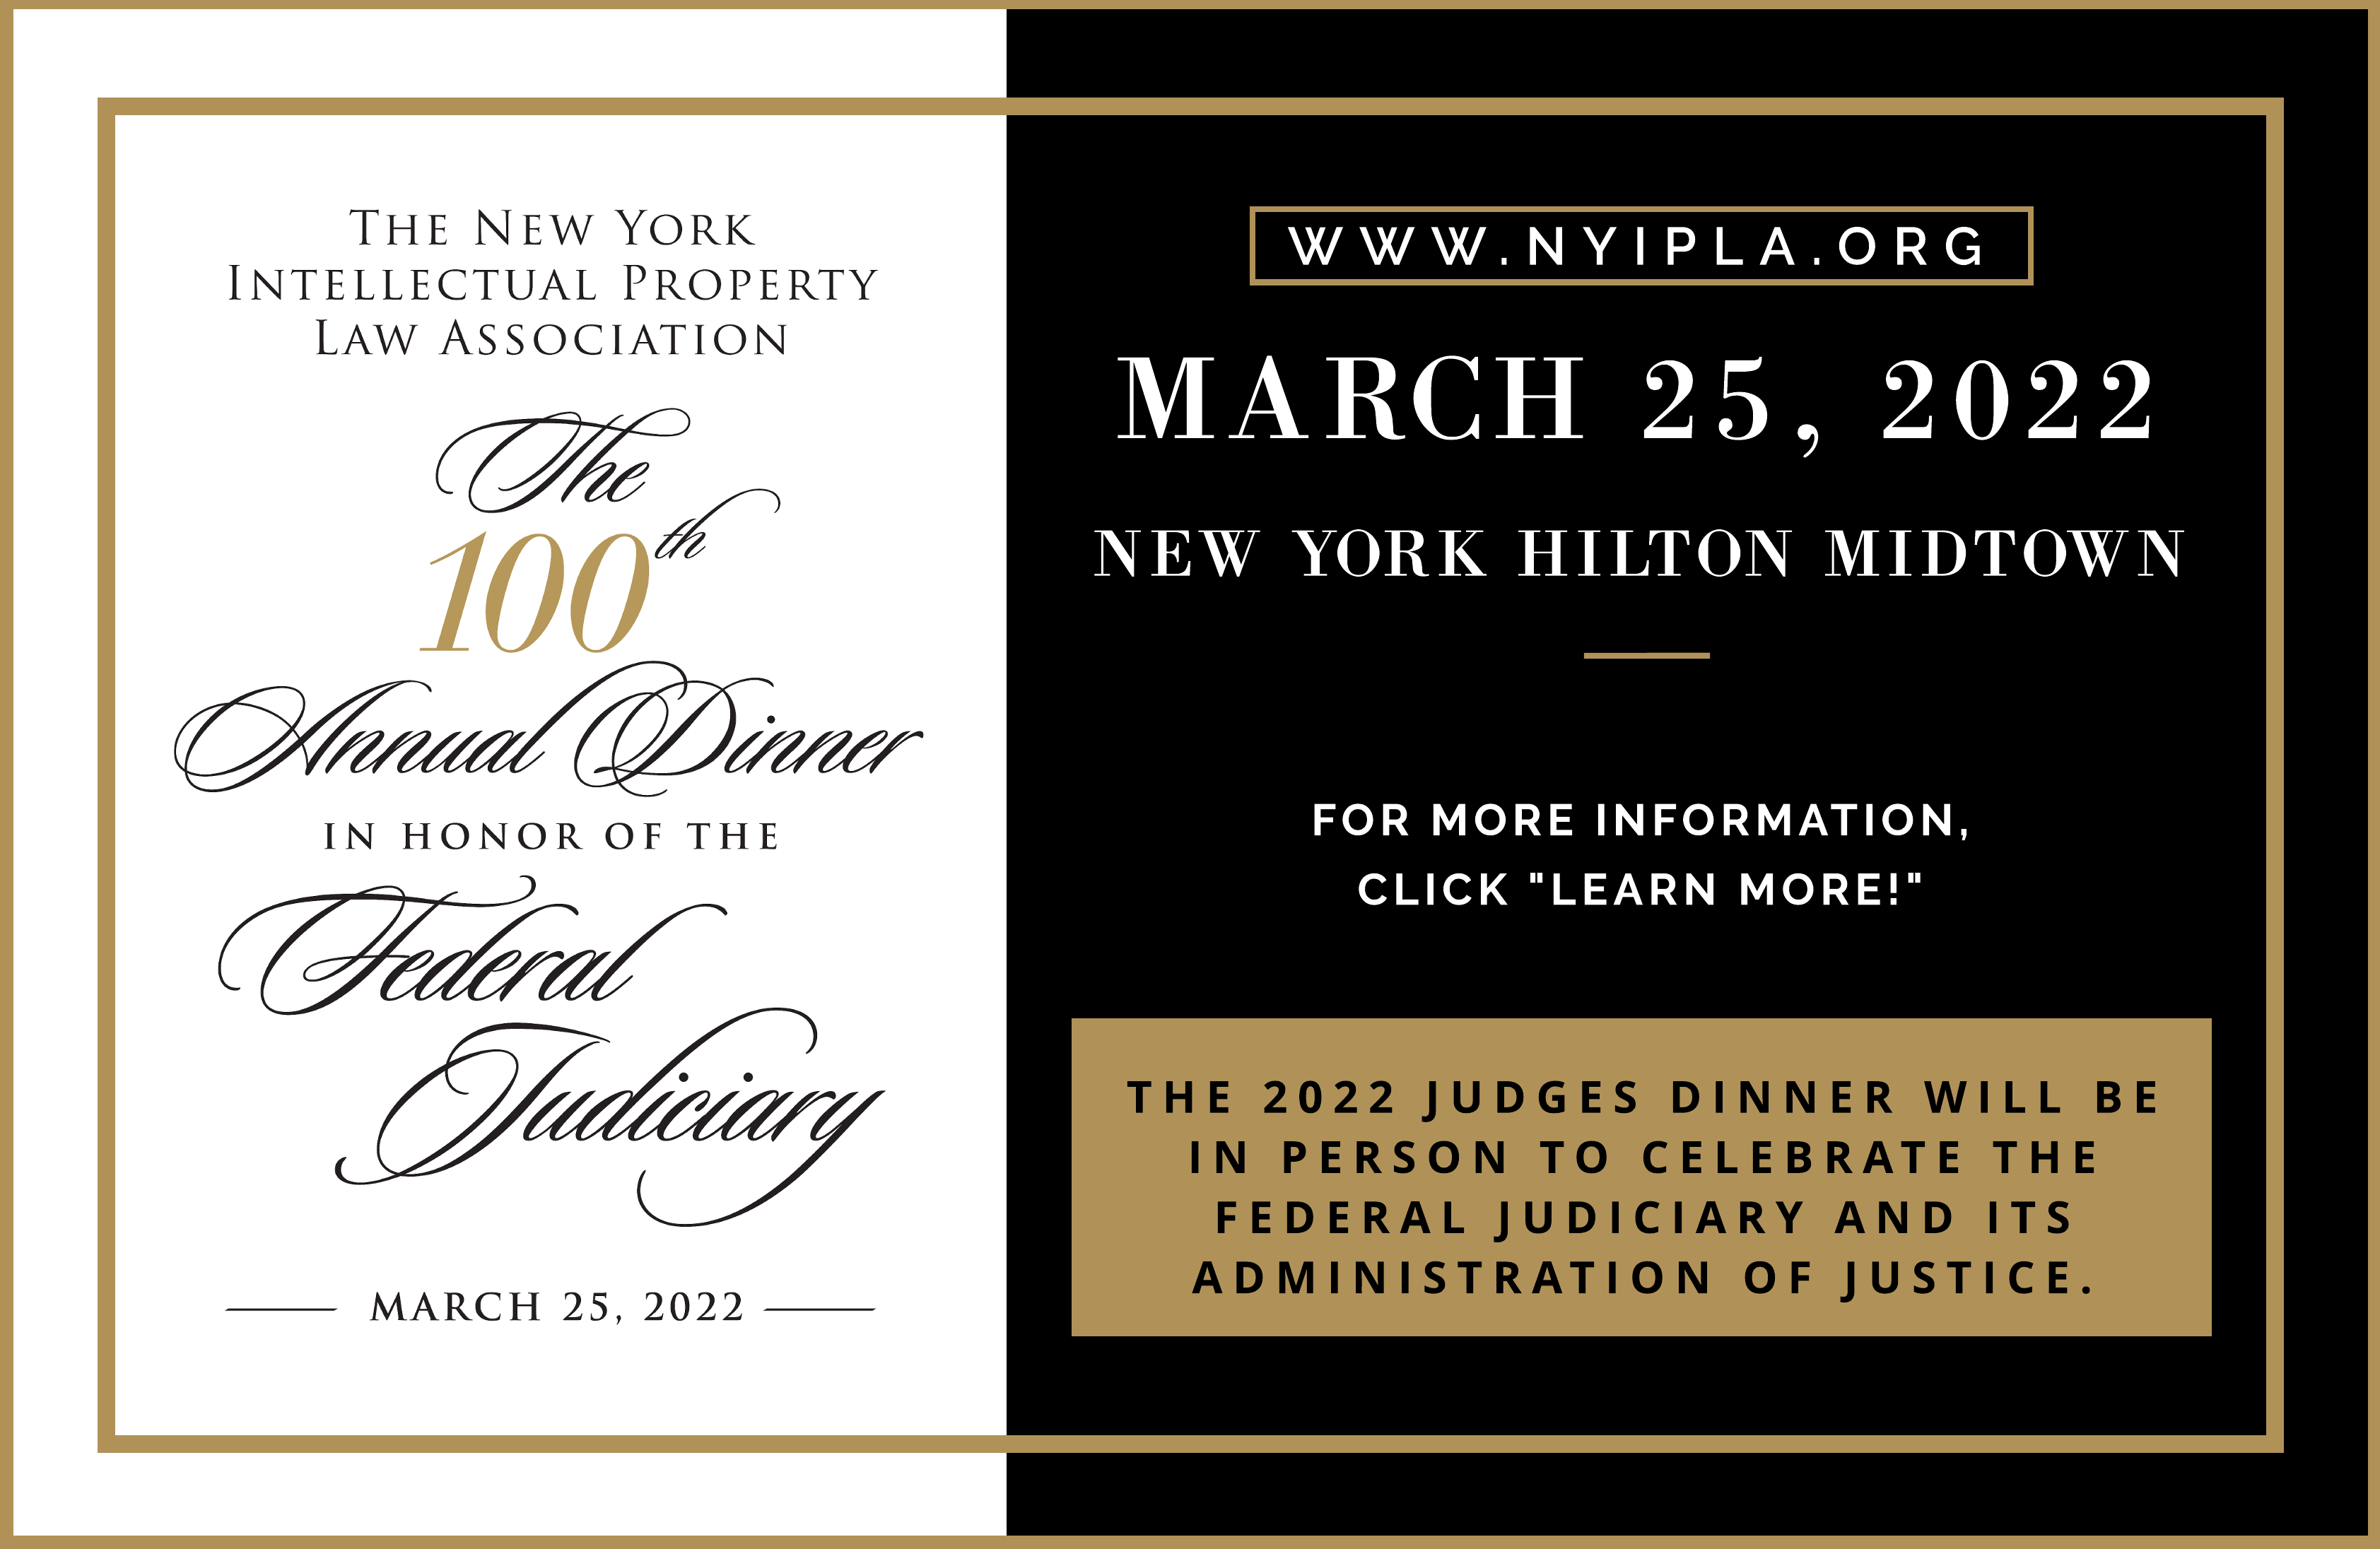 100th Annual Dinner in Honor of the Federal Judiciary